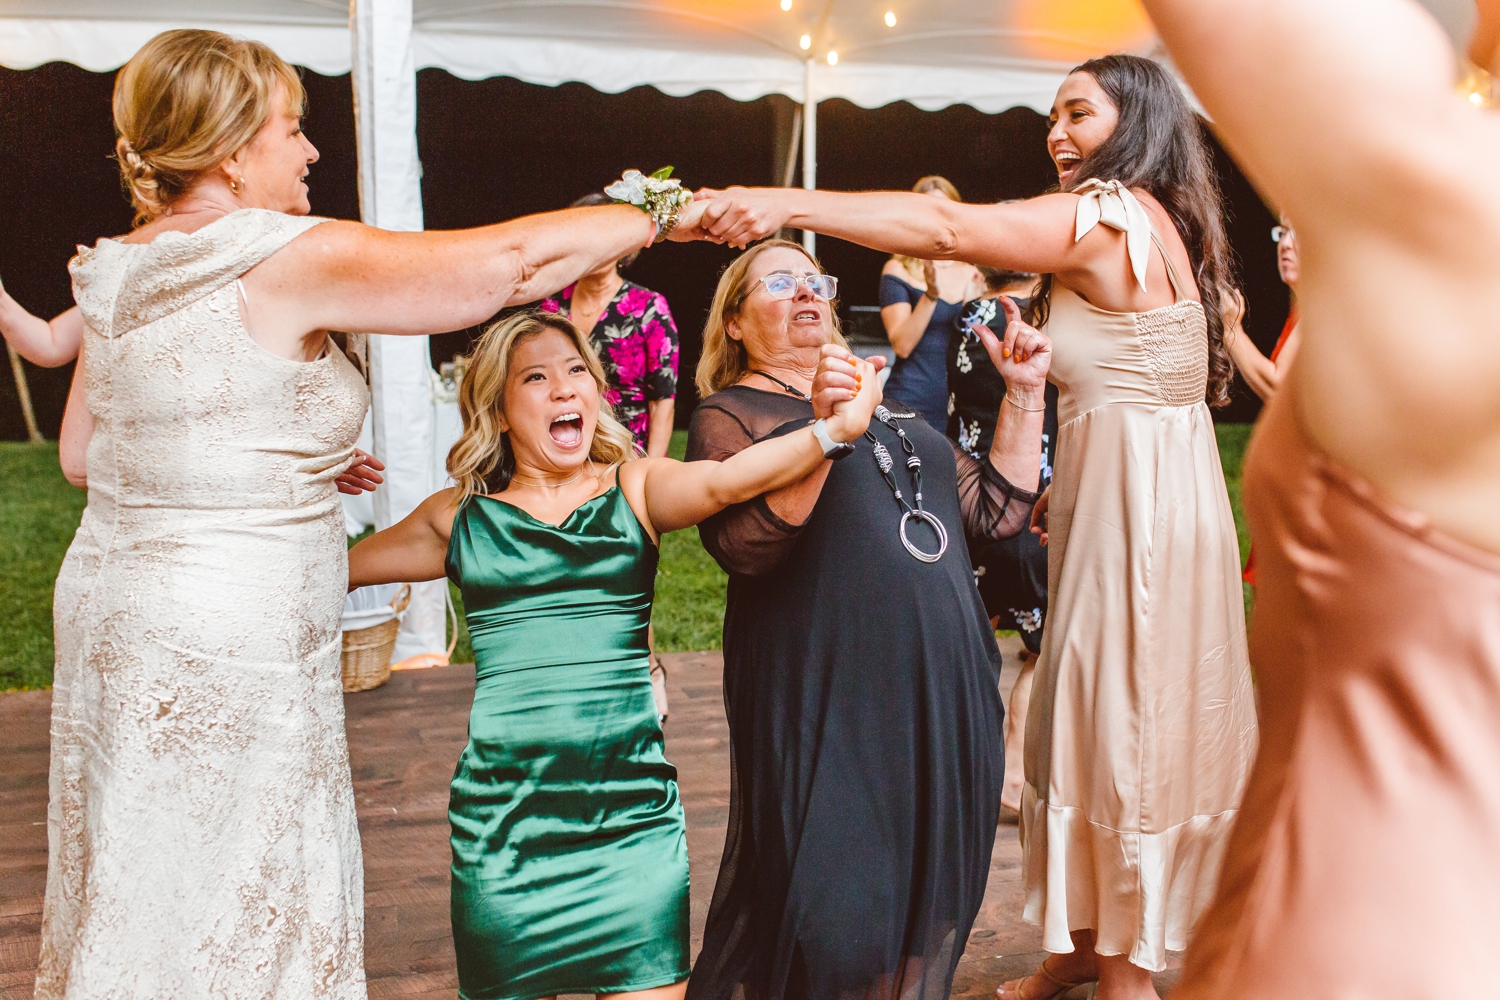 Guests dancing at Ladew Topiary Gardens wedding | Brooke Michelle Photo